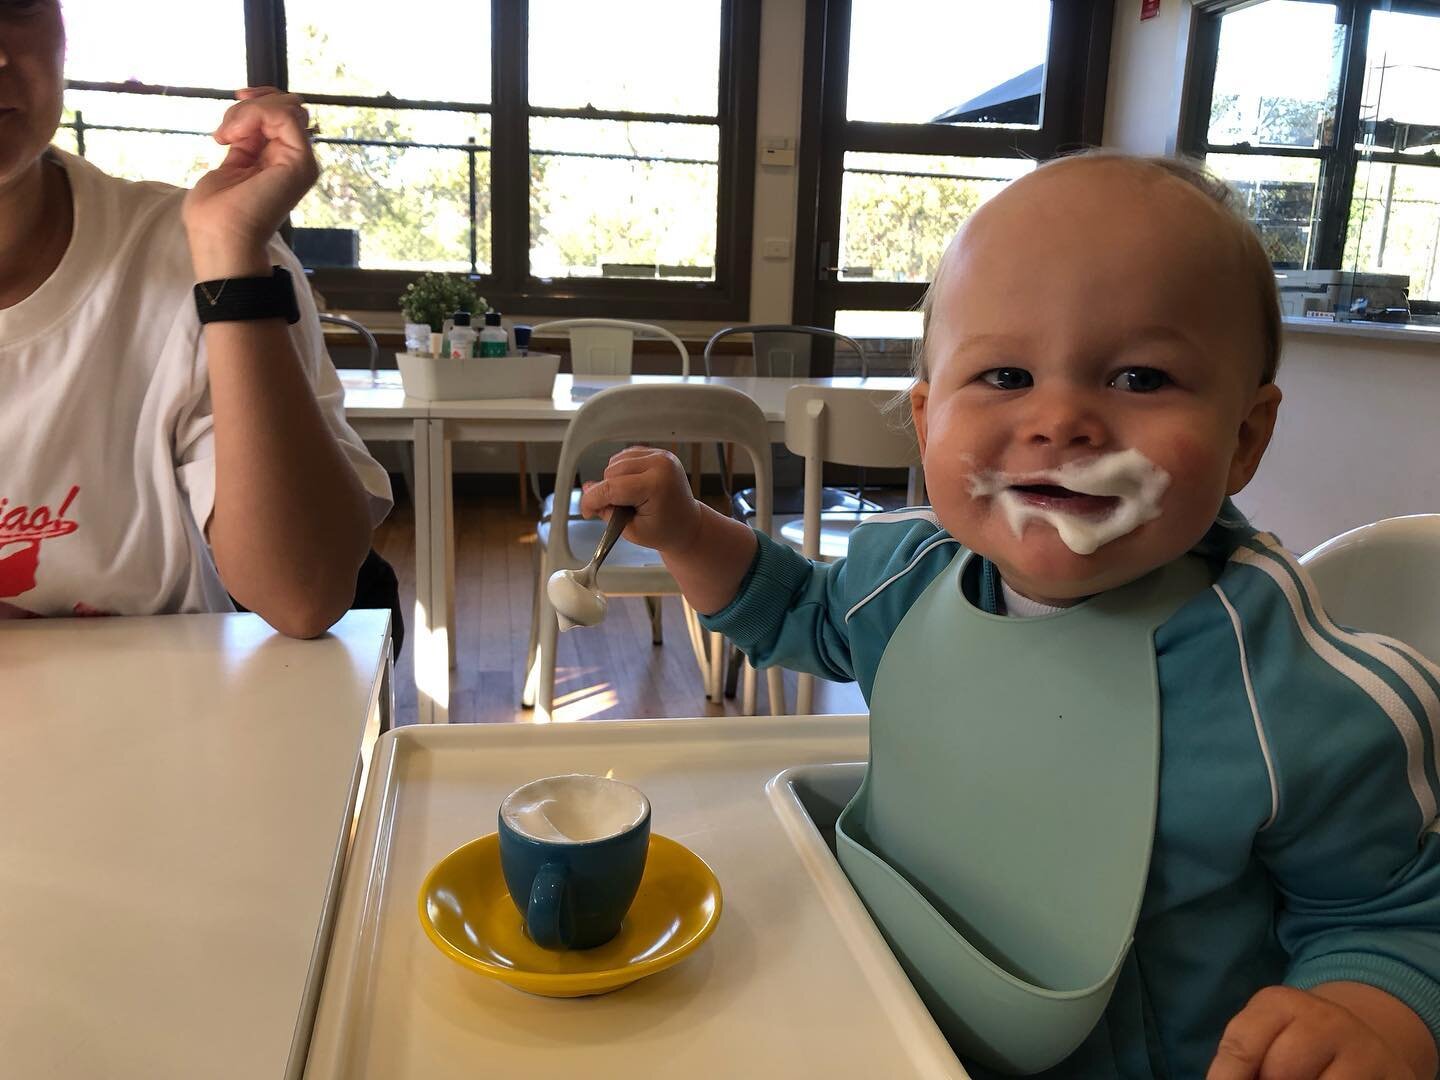 Yo Fred. You&rsquo;ve got a little something on your face there moosh! 😂

@jordanahrows @w.rows ❤️❤️

#milkmoustache #milkbeard #smile #babycino #happy #adidas #leisurewear #sunday #melbournekids #coolkids #communitykindnessconnection #seeyouatthepa